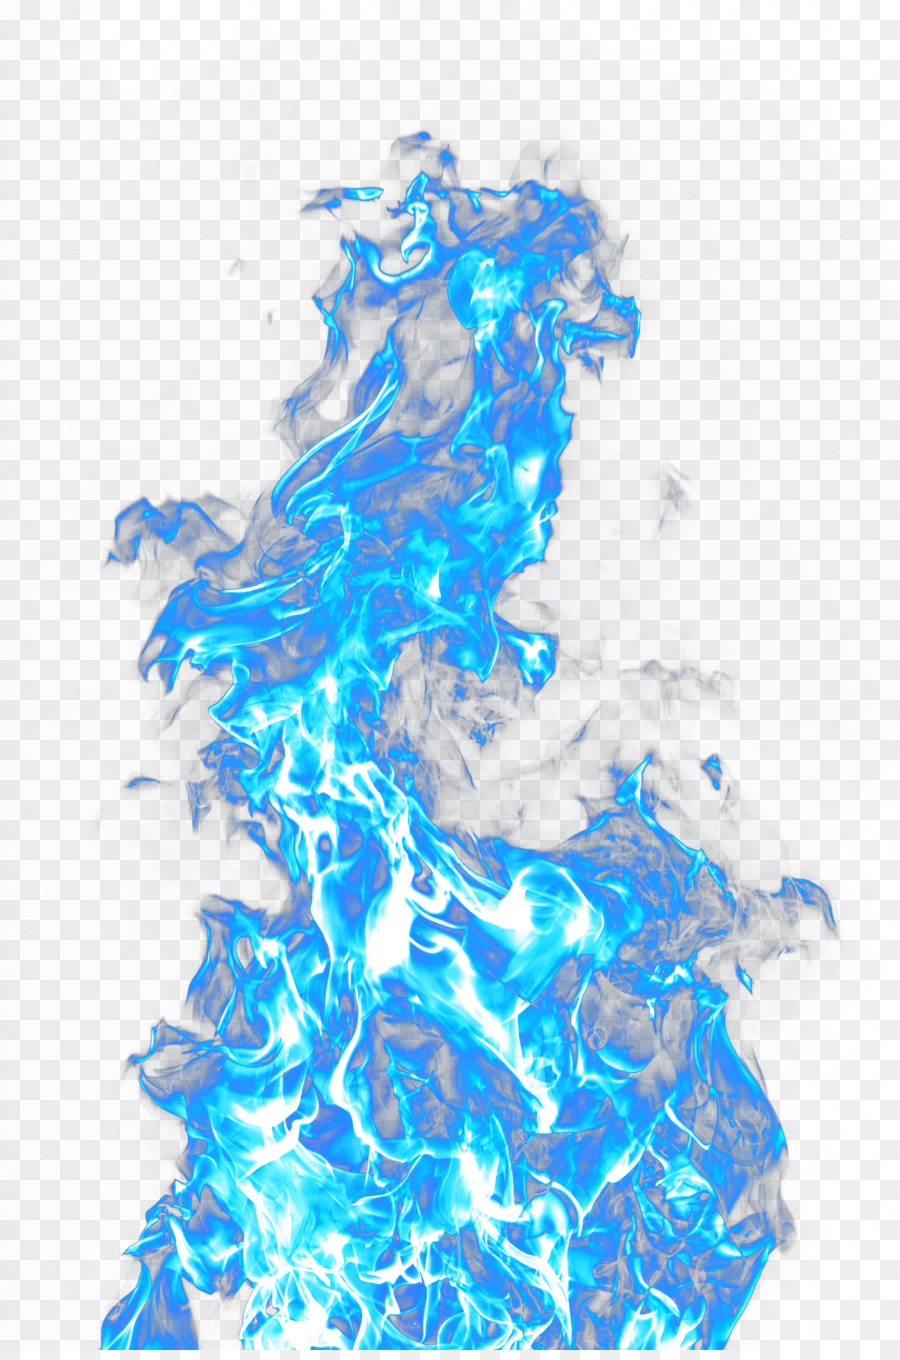 Flame Light - Beautiful blue flame png download - 2848*4272 - Free Transparent  Light png Download.